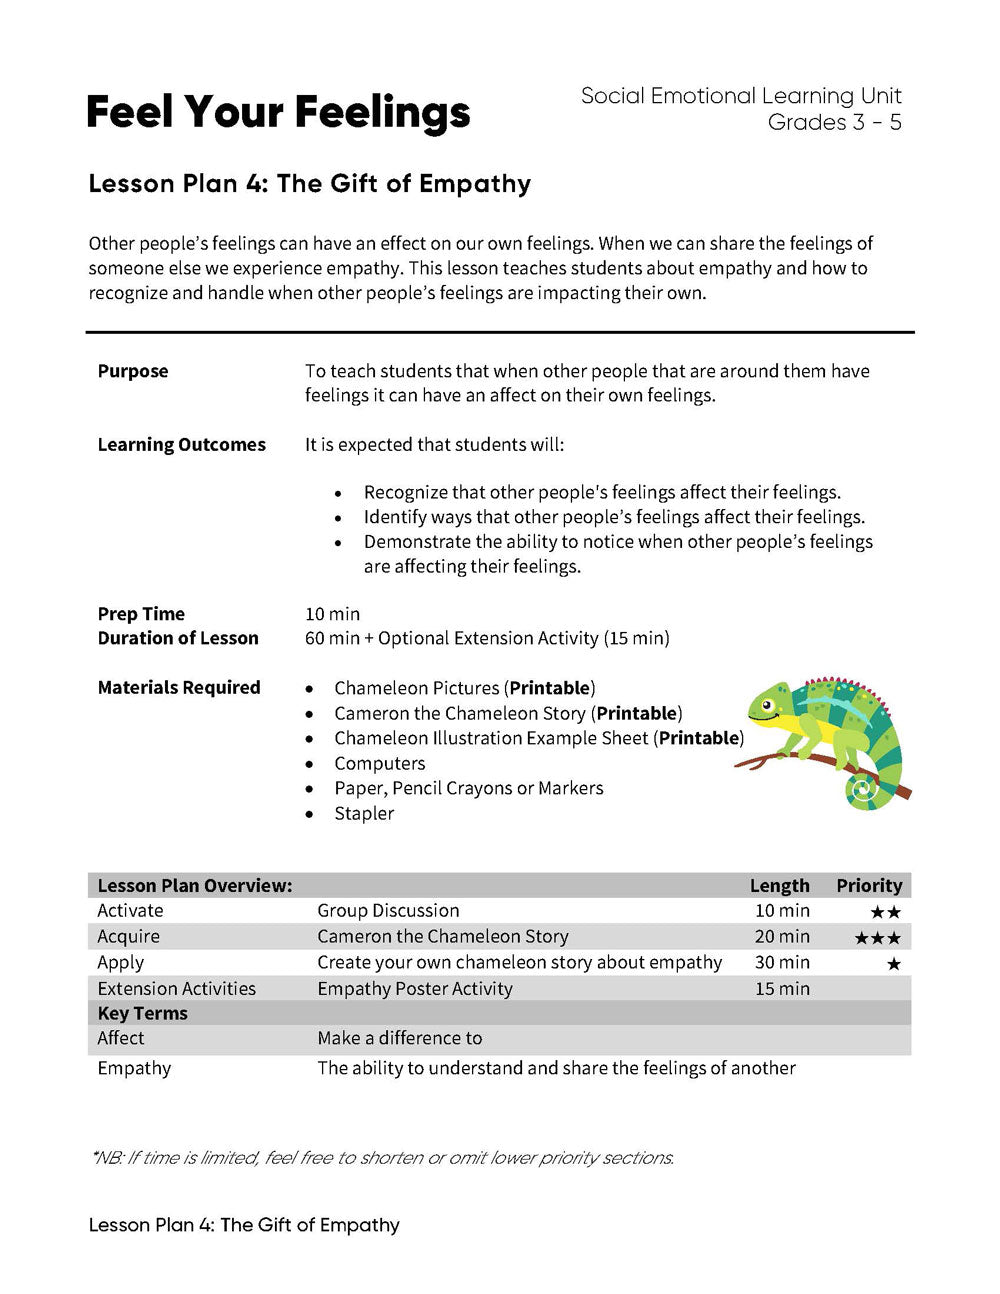 Lesson Plan 4: The Gift of Empathy